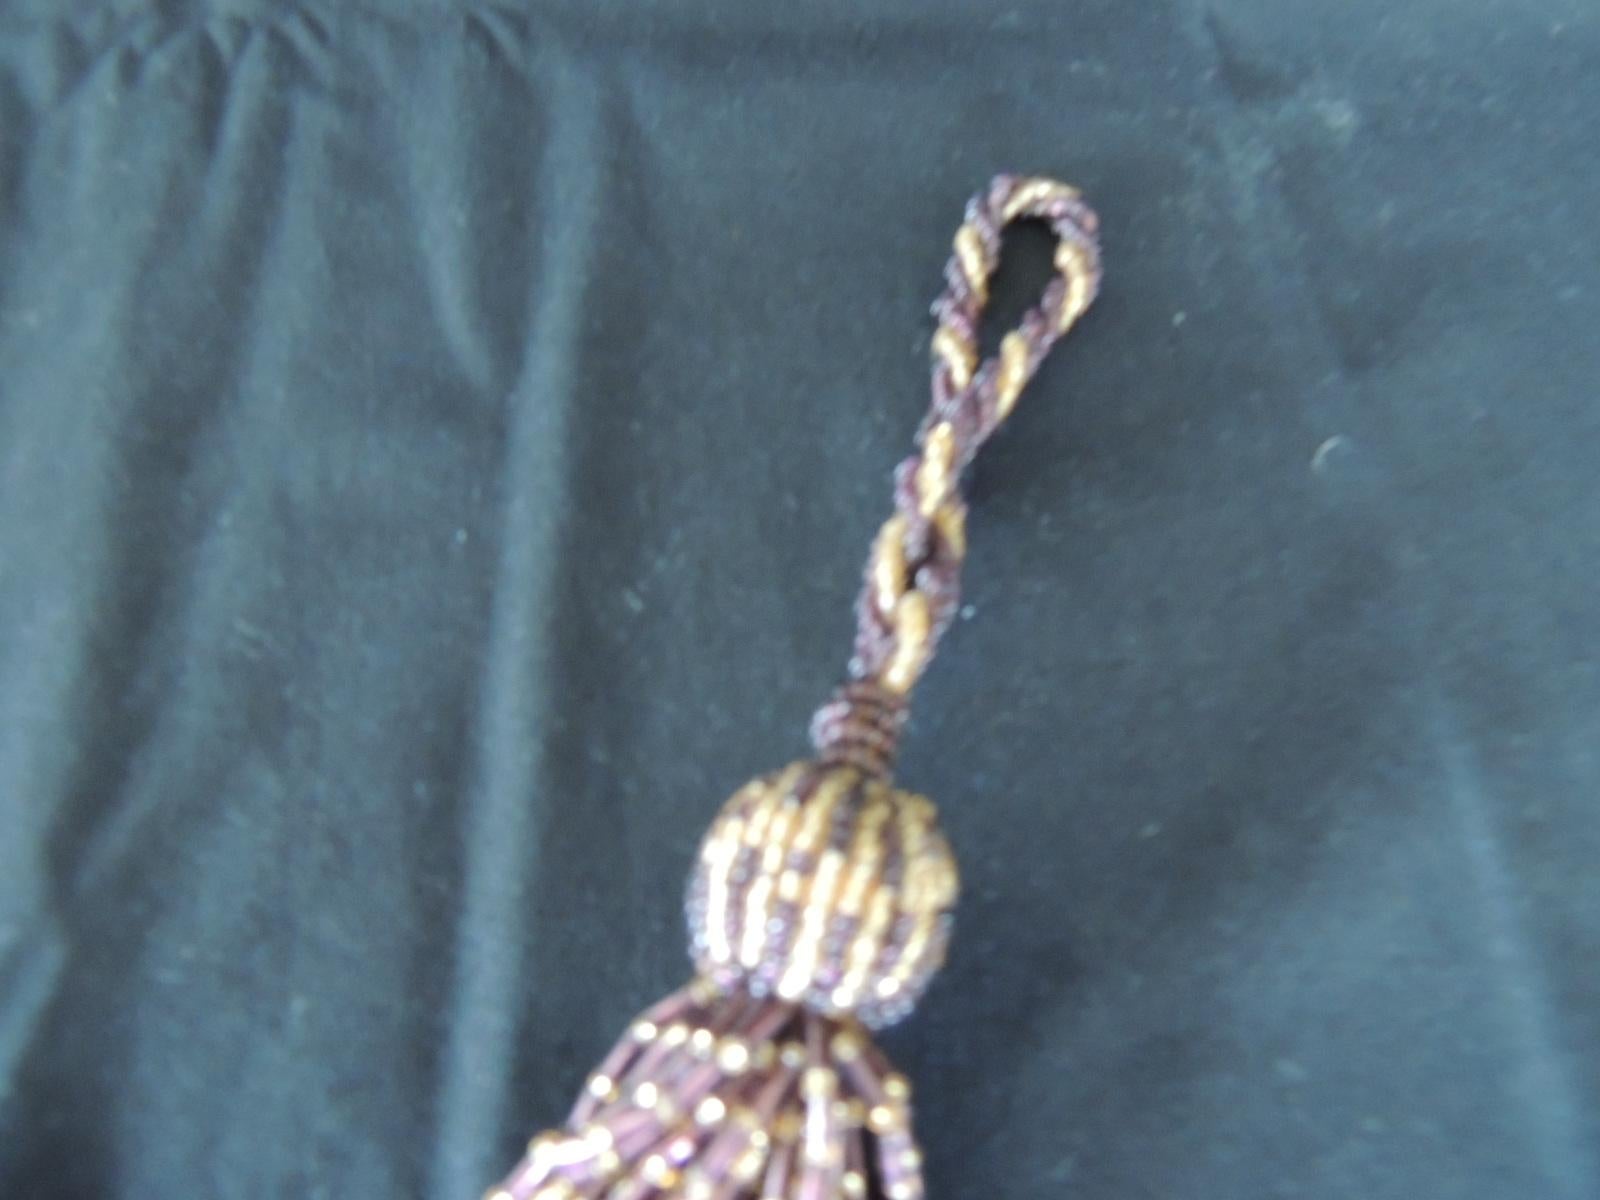 French glass beads decorative tassel.
handwoven key tassel with glass and acrylic beads.
In shades of brown, burgundy and gold.
Size: 7